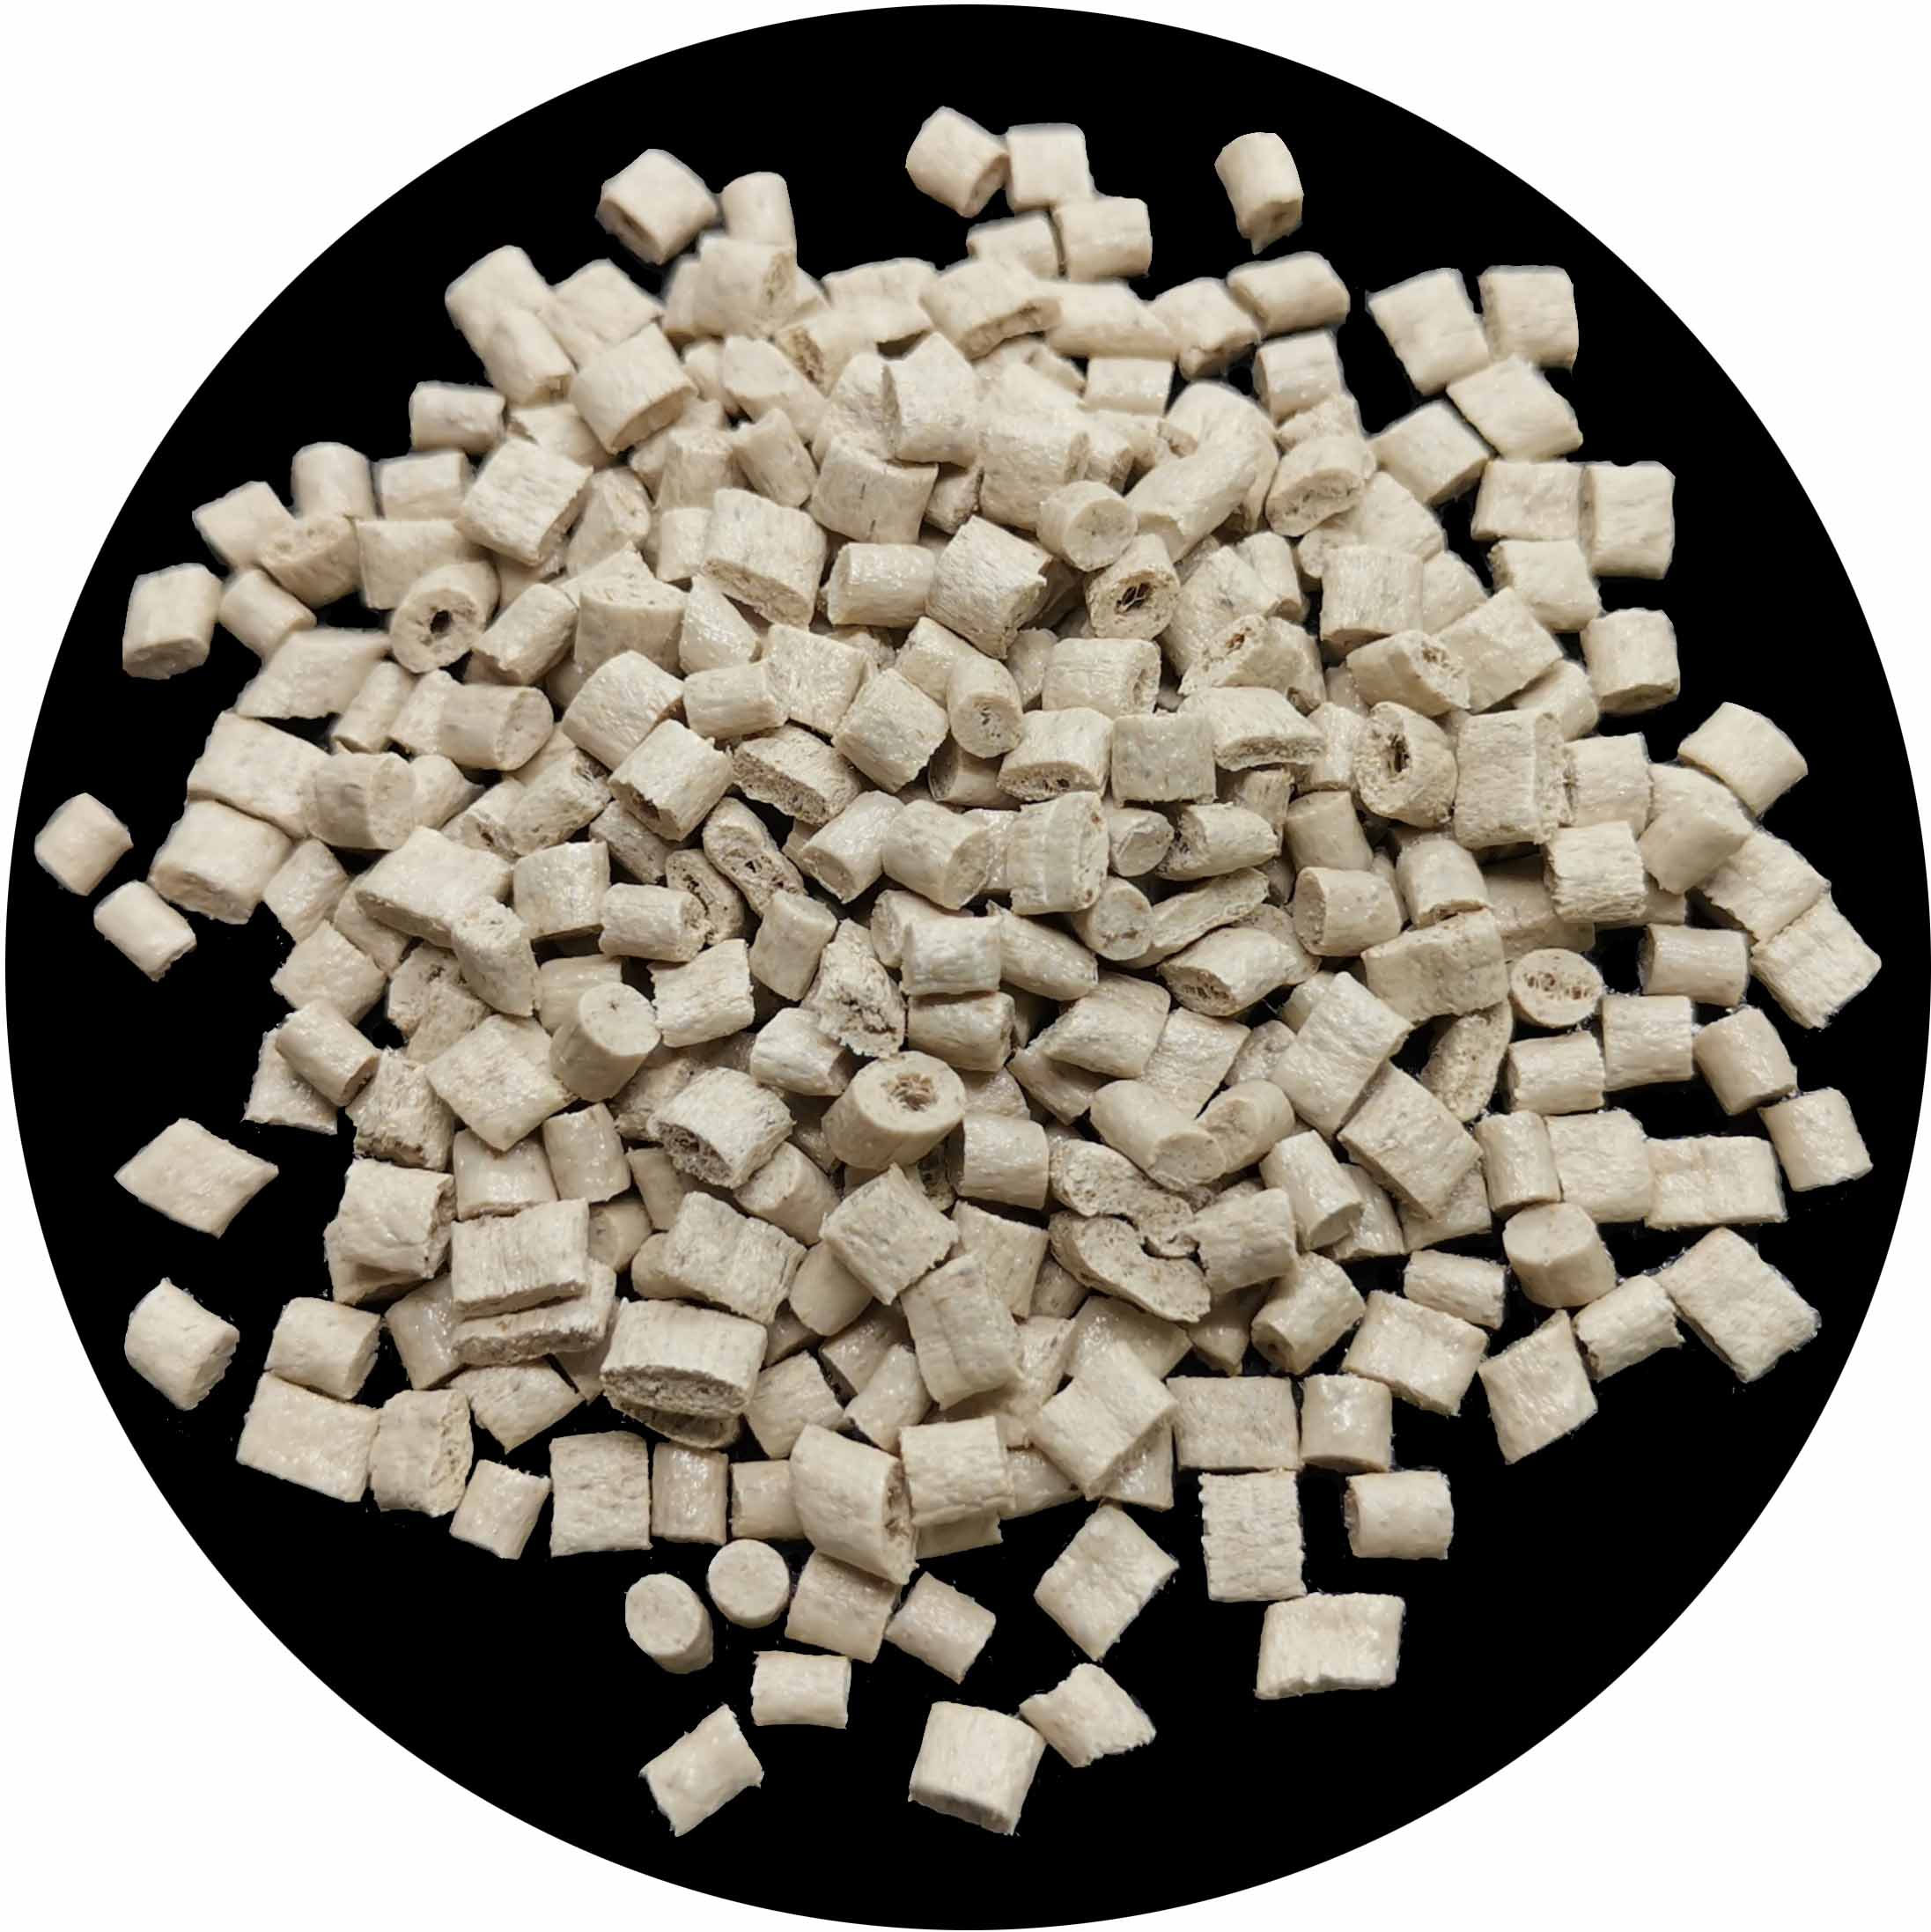 Biopolymer ABS and bamboo fiber compounds